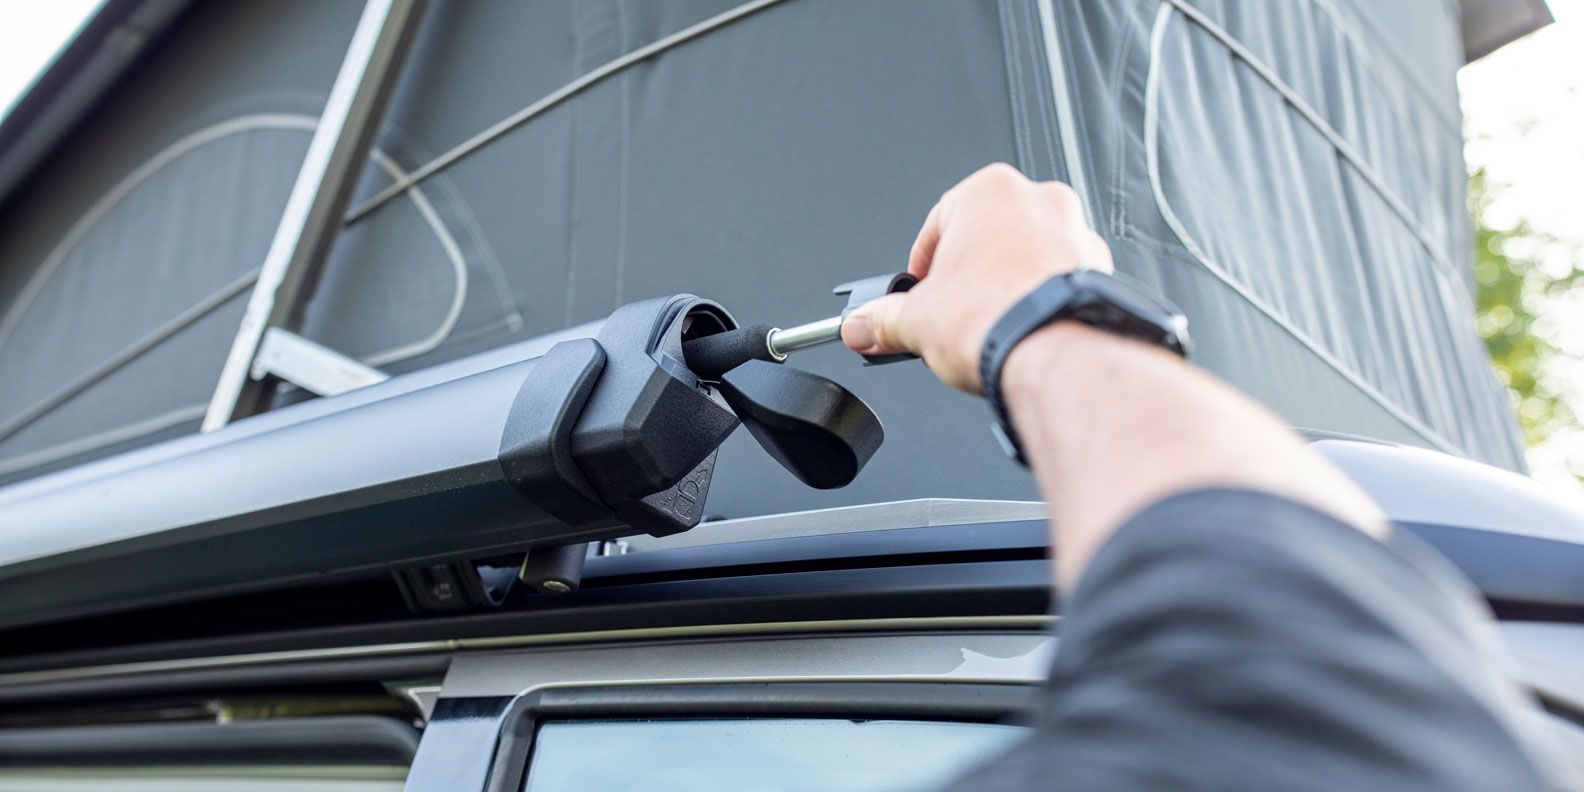 A person inserts their hand crank into the Thule Sidehill compact van awning.